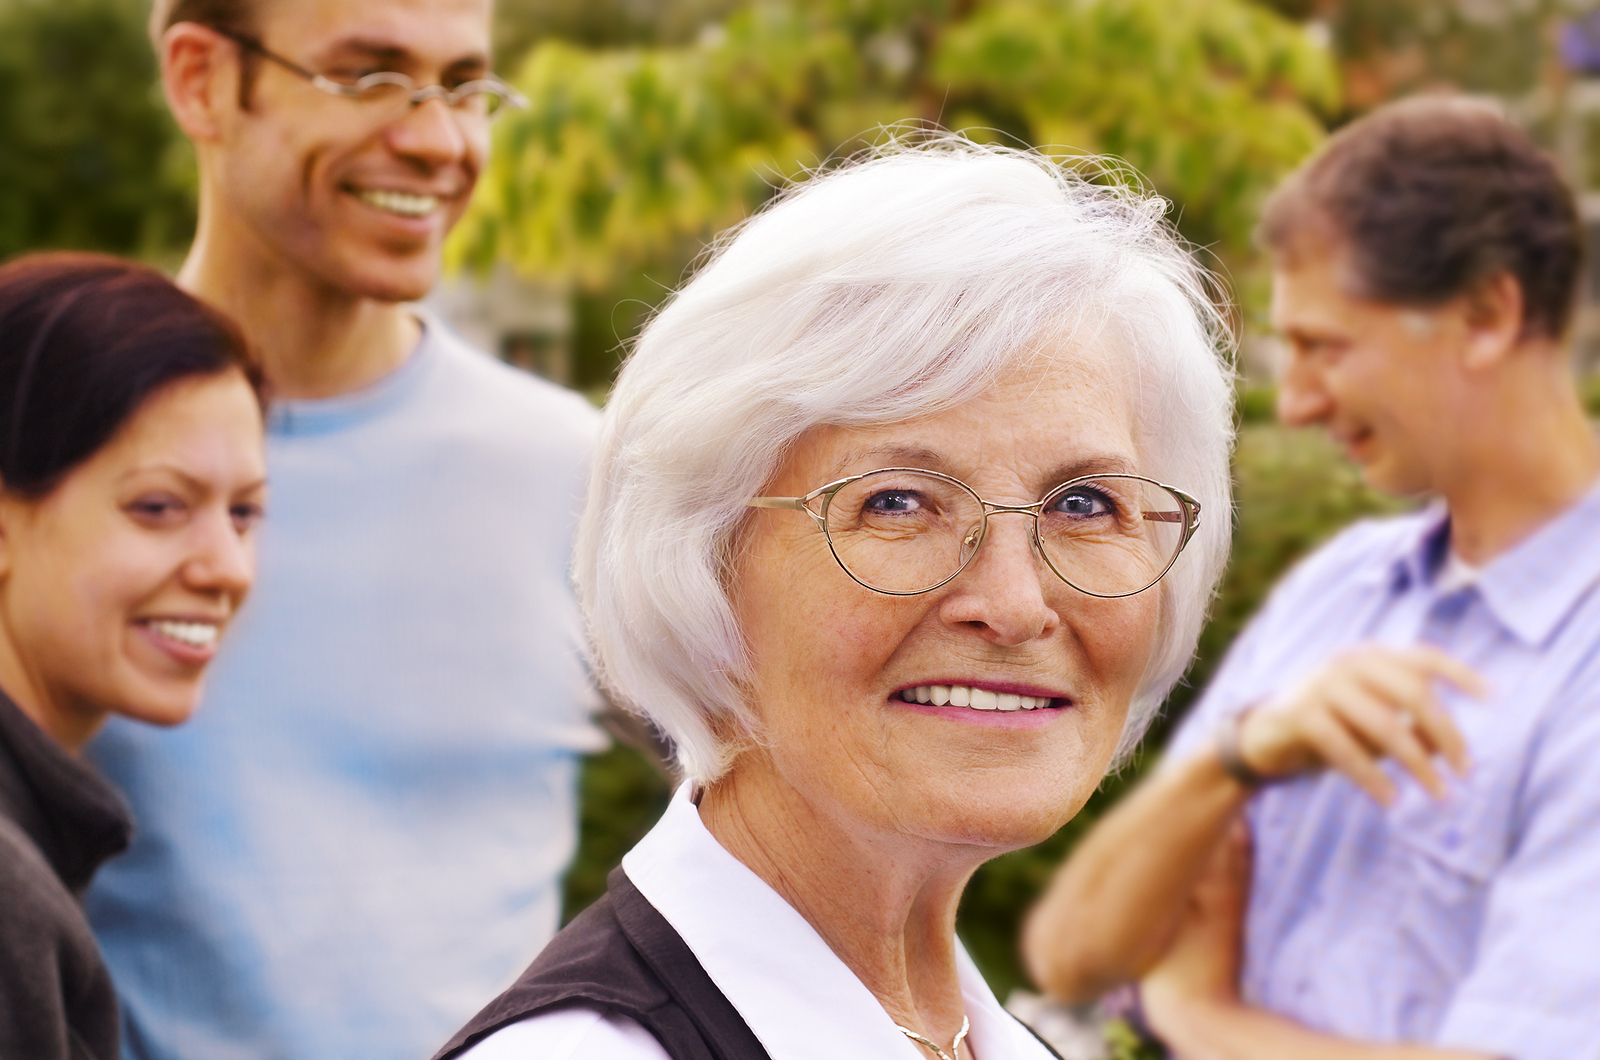 Senior woman smiling in front of three young people, outdoor